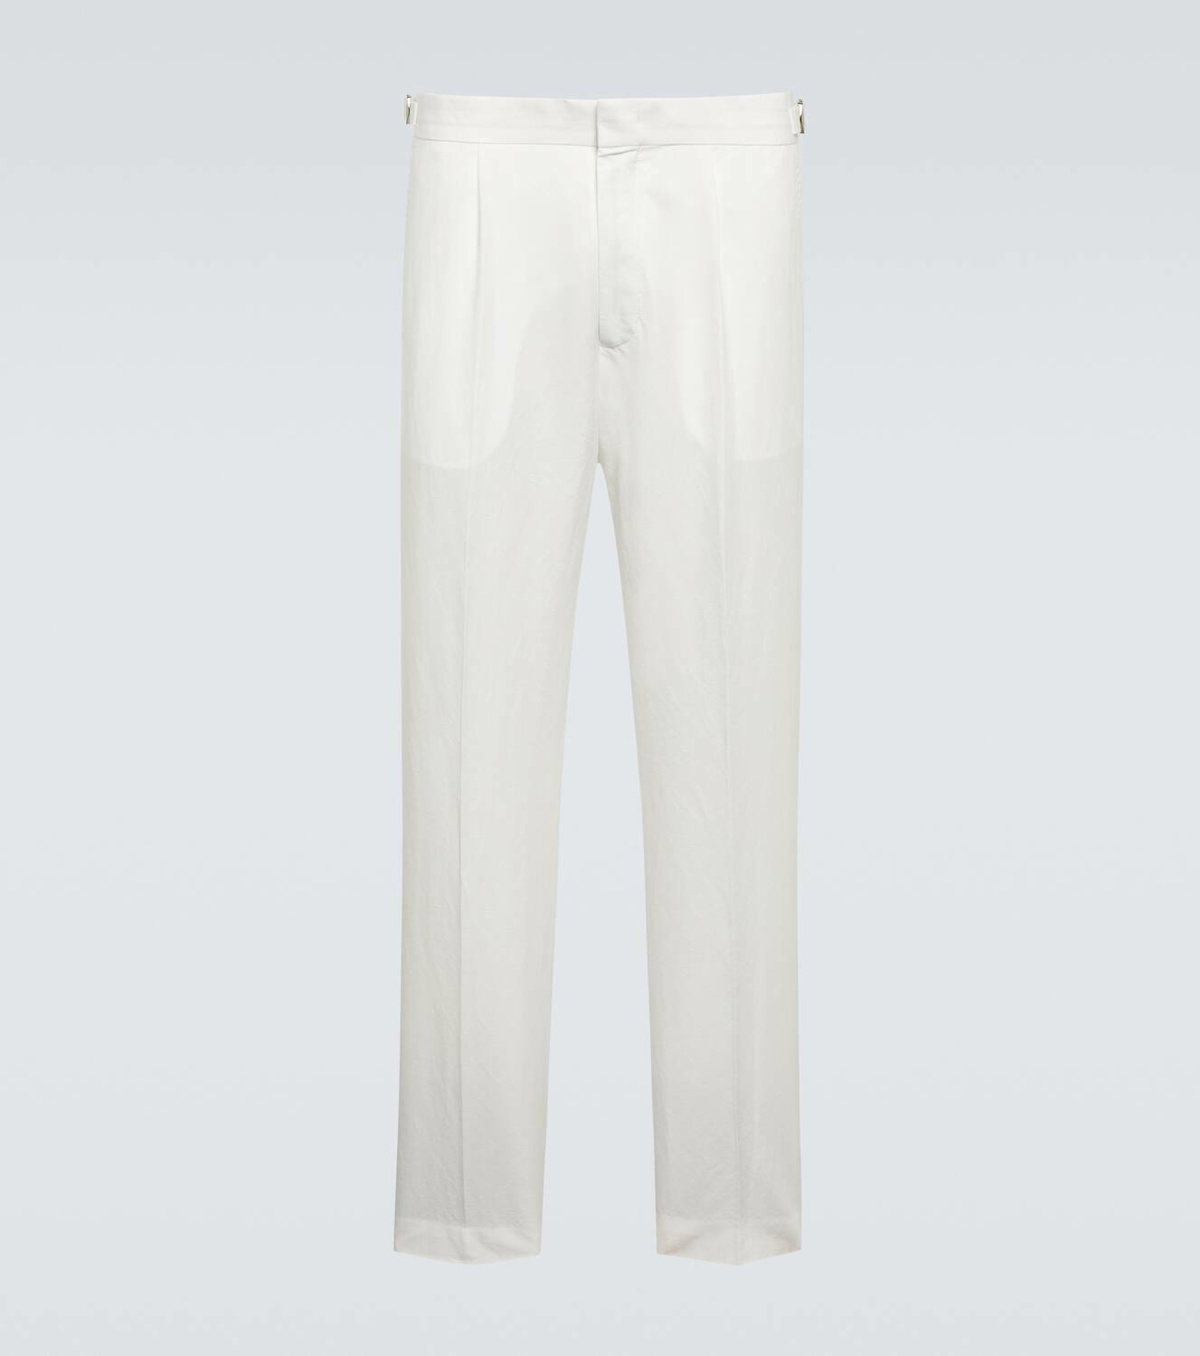 Orlebar Brown Carsyn linen and cotton tapered pants